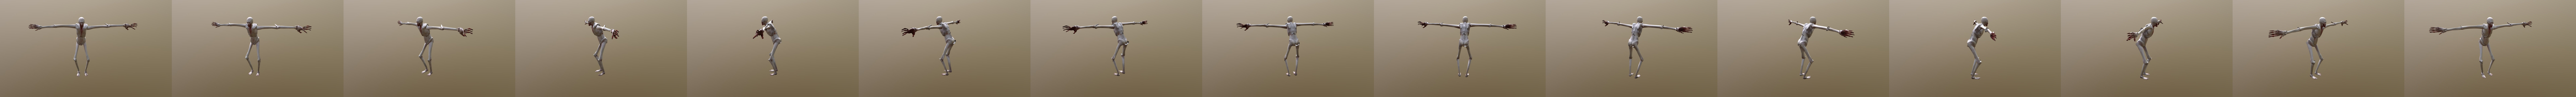 Scp 096 Download Free 3d Model By Maxime66410 Max66410 1bf76fc Sketchfab - scp 096 fix animations free roblox